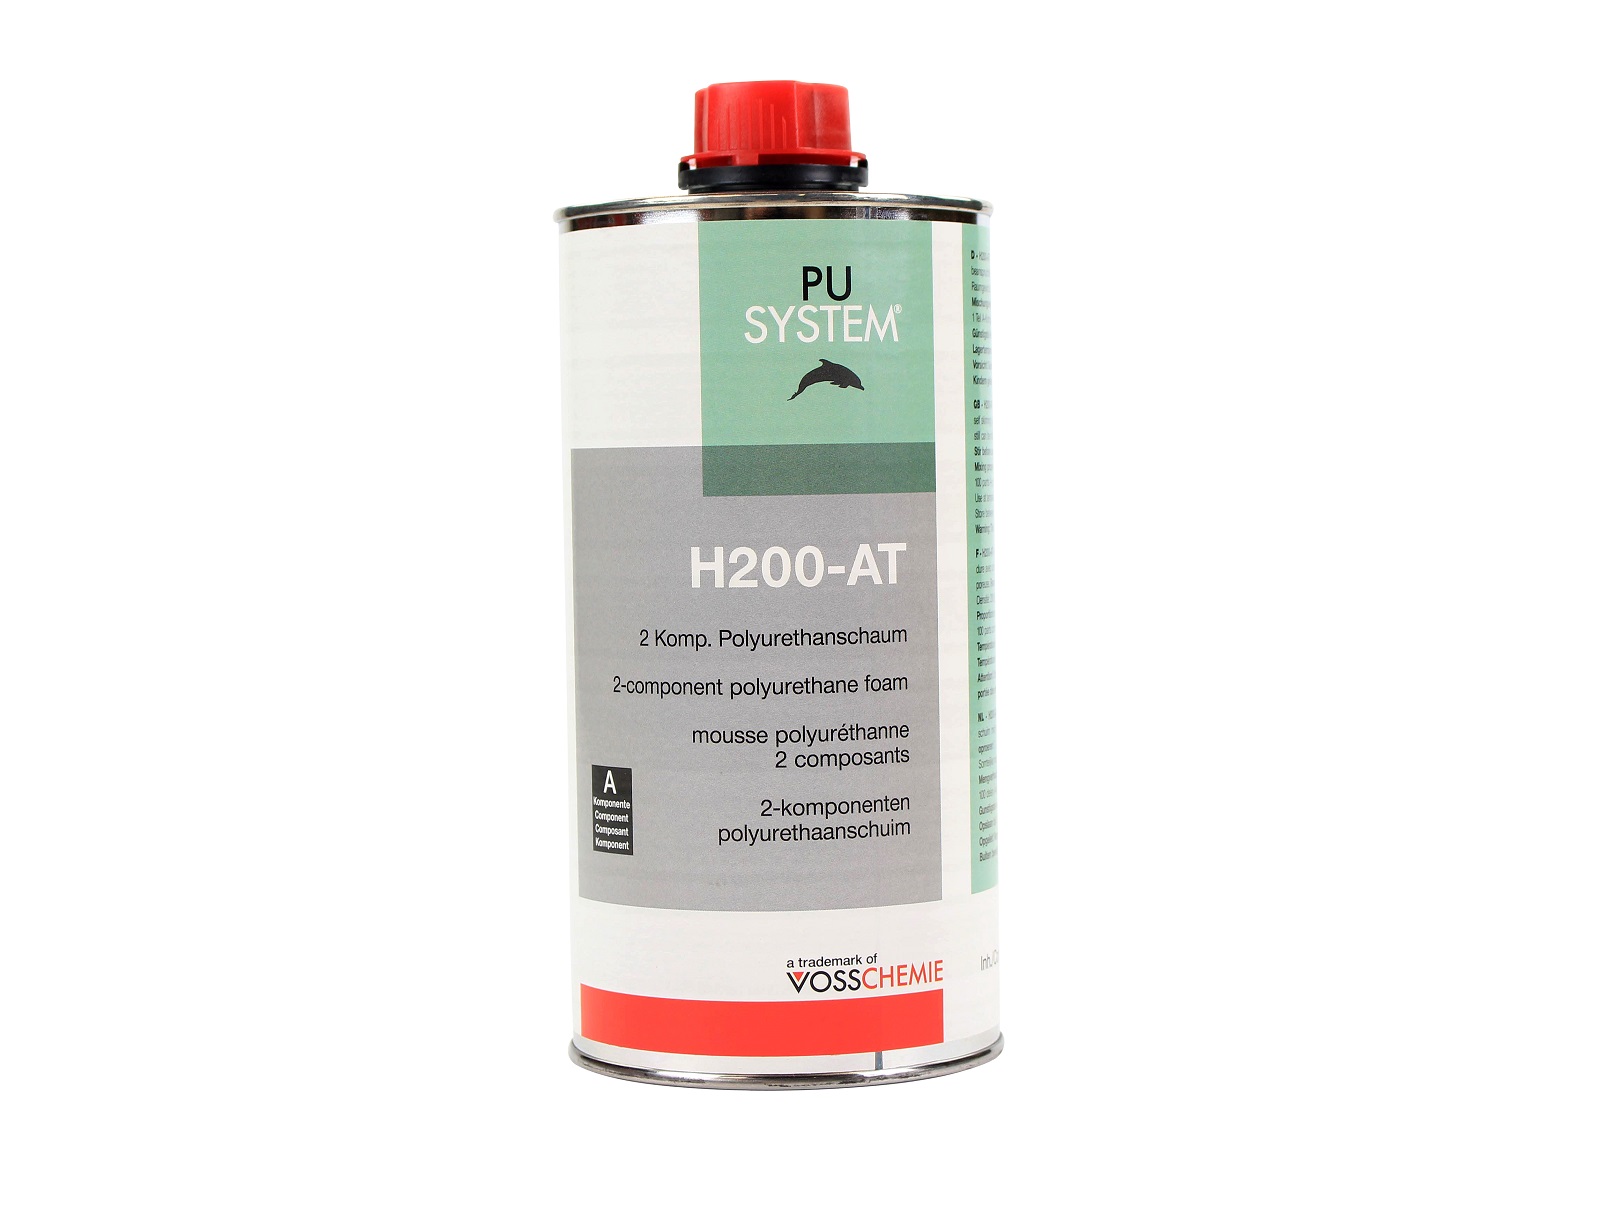 PU foam H200-AT - Insulating or filling hollow spaces - 1 kg